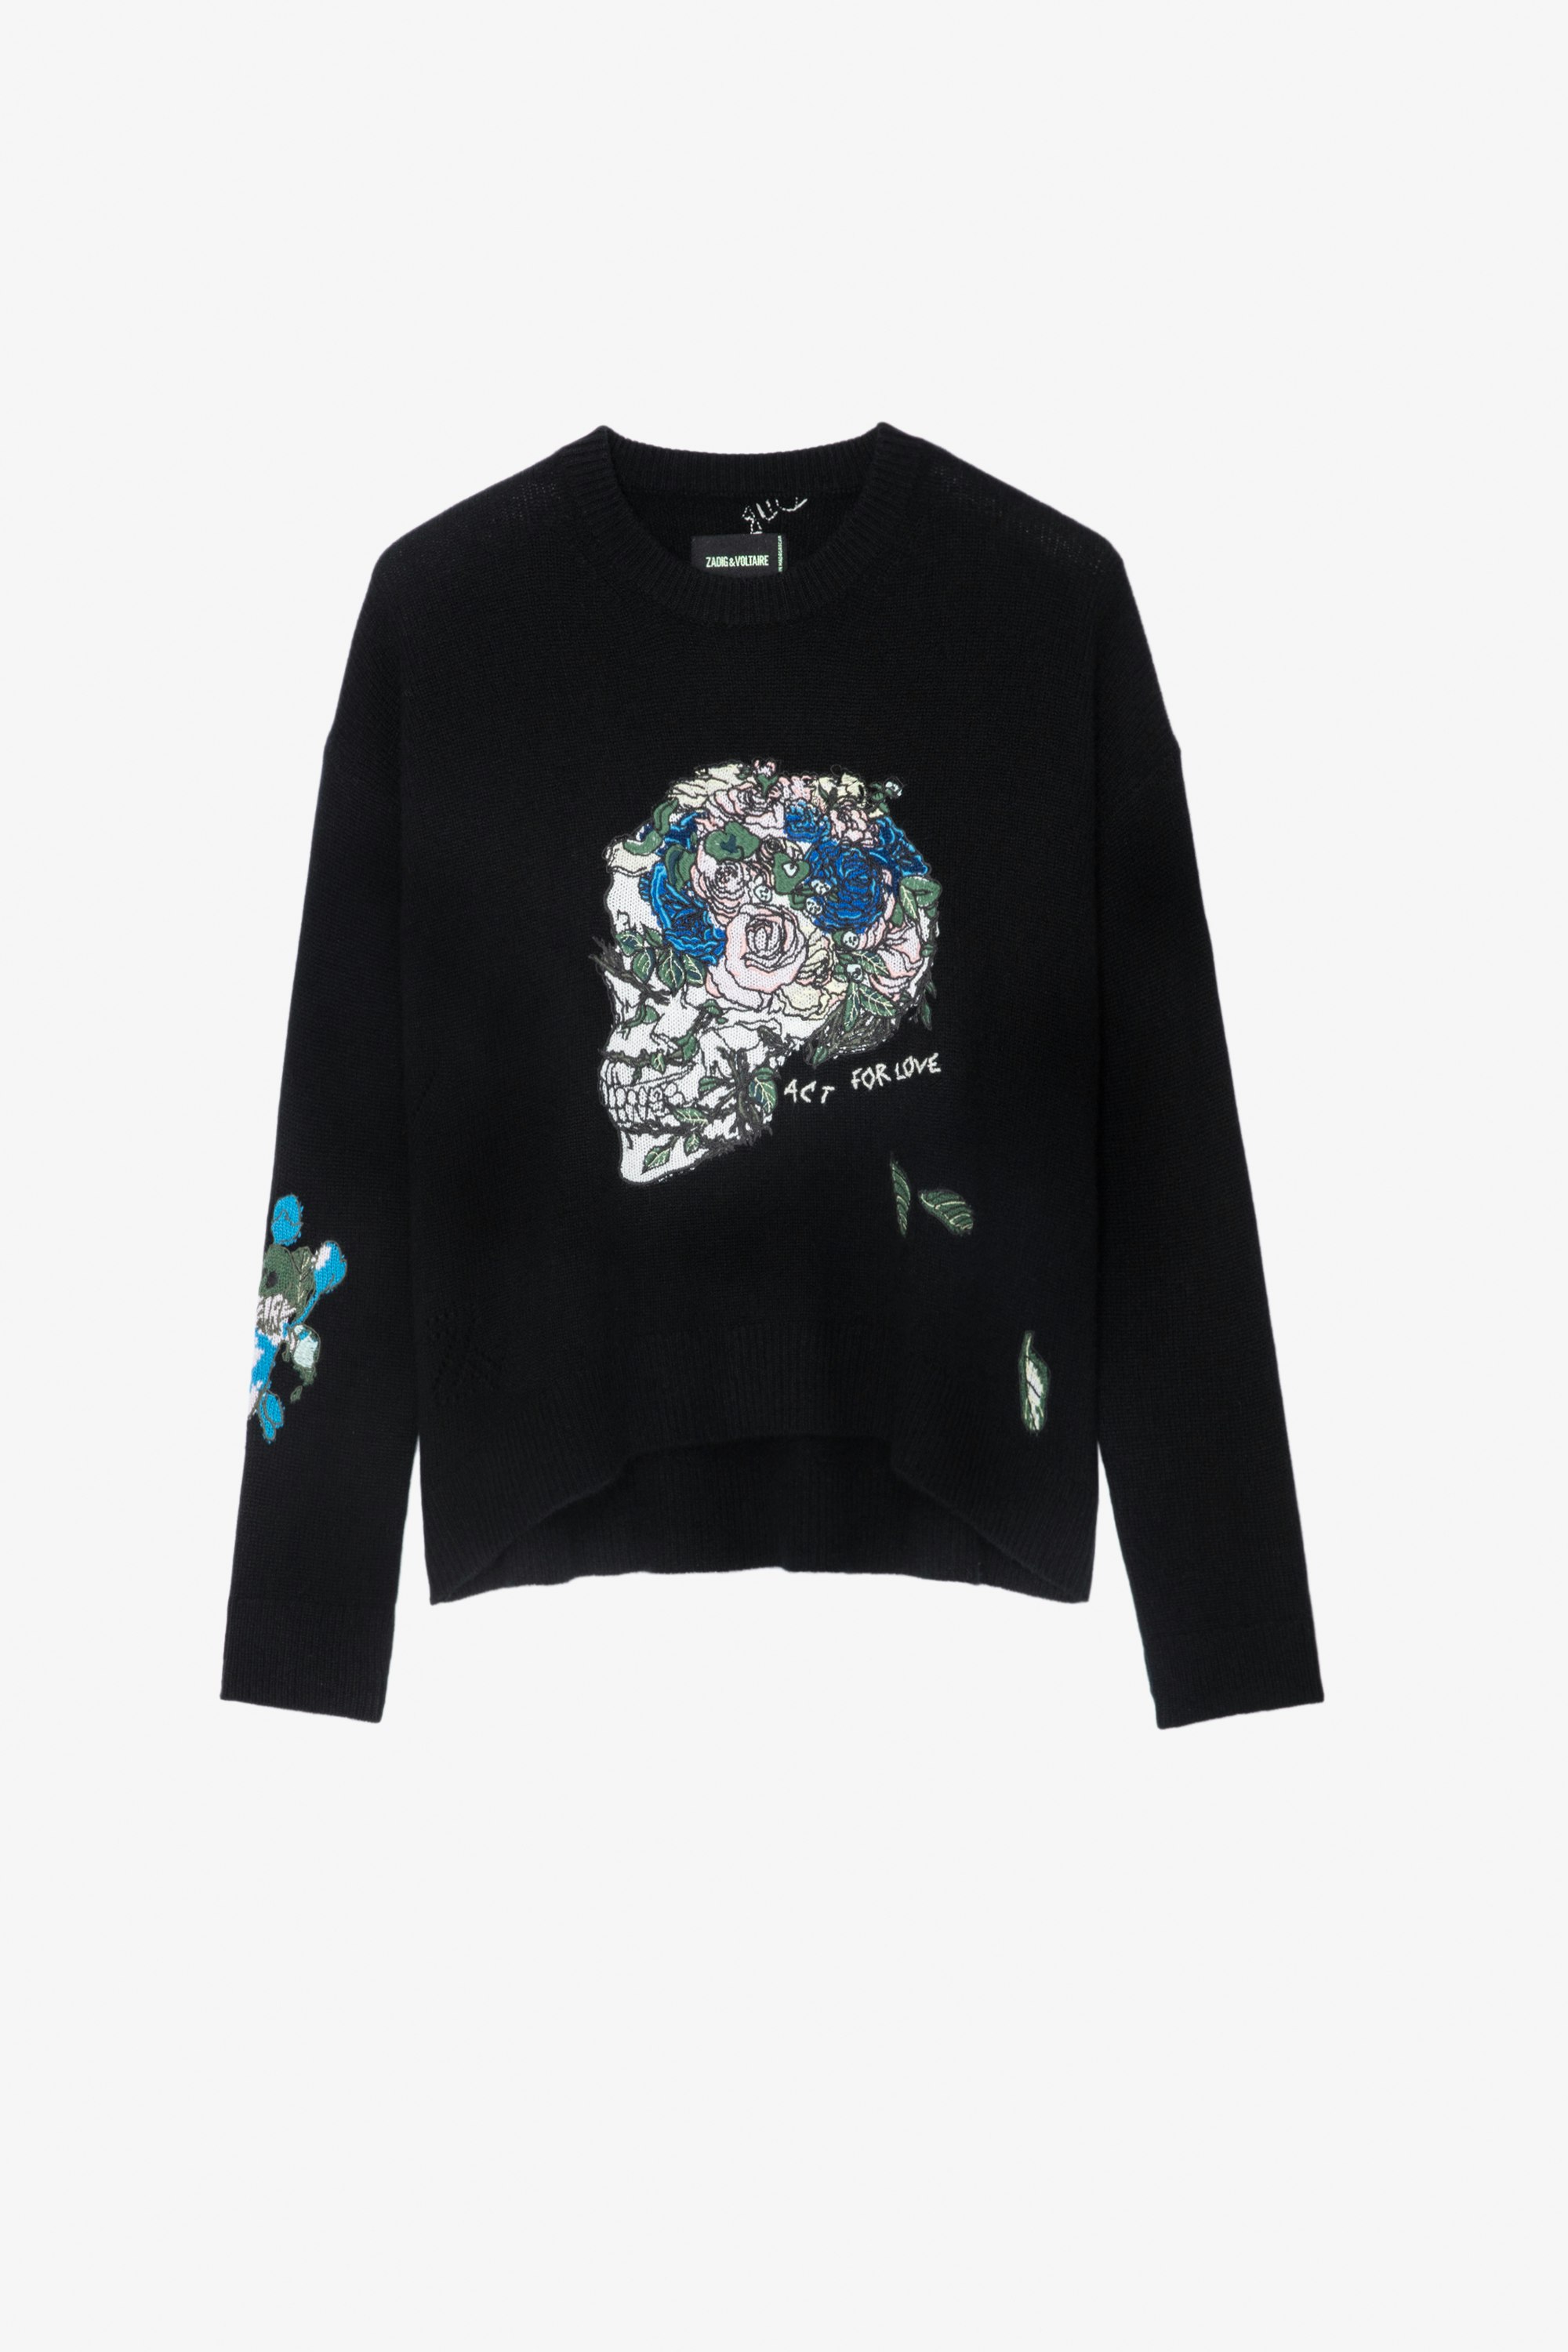 Markus Cashmere Jumper Women’s black cashmere jumper with floral motifs, a skull and “Act For Love” and “Amour” slogans